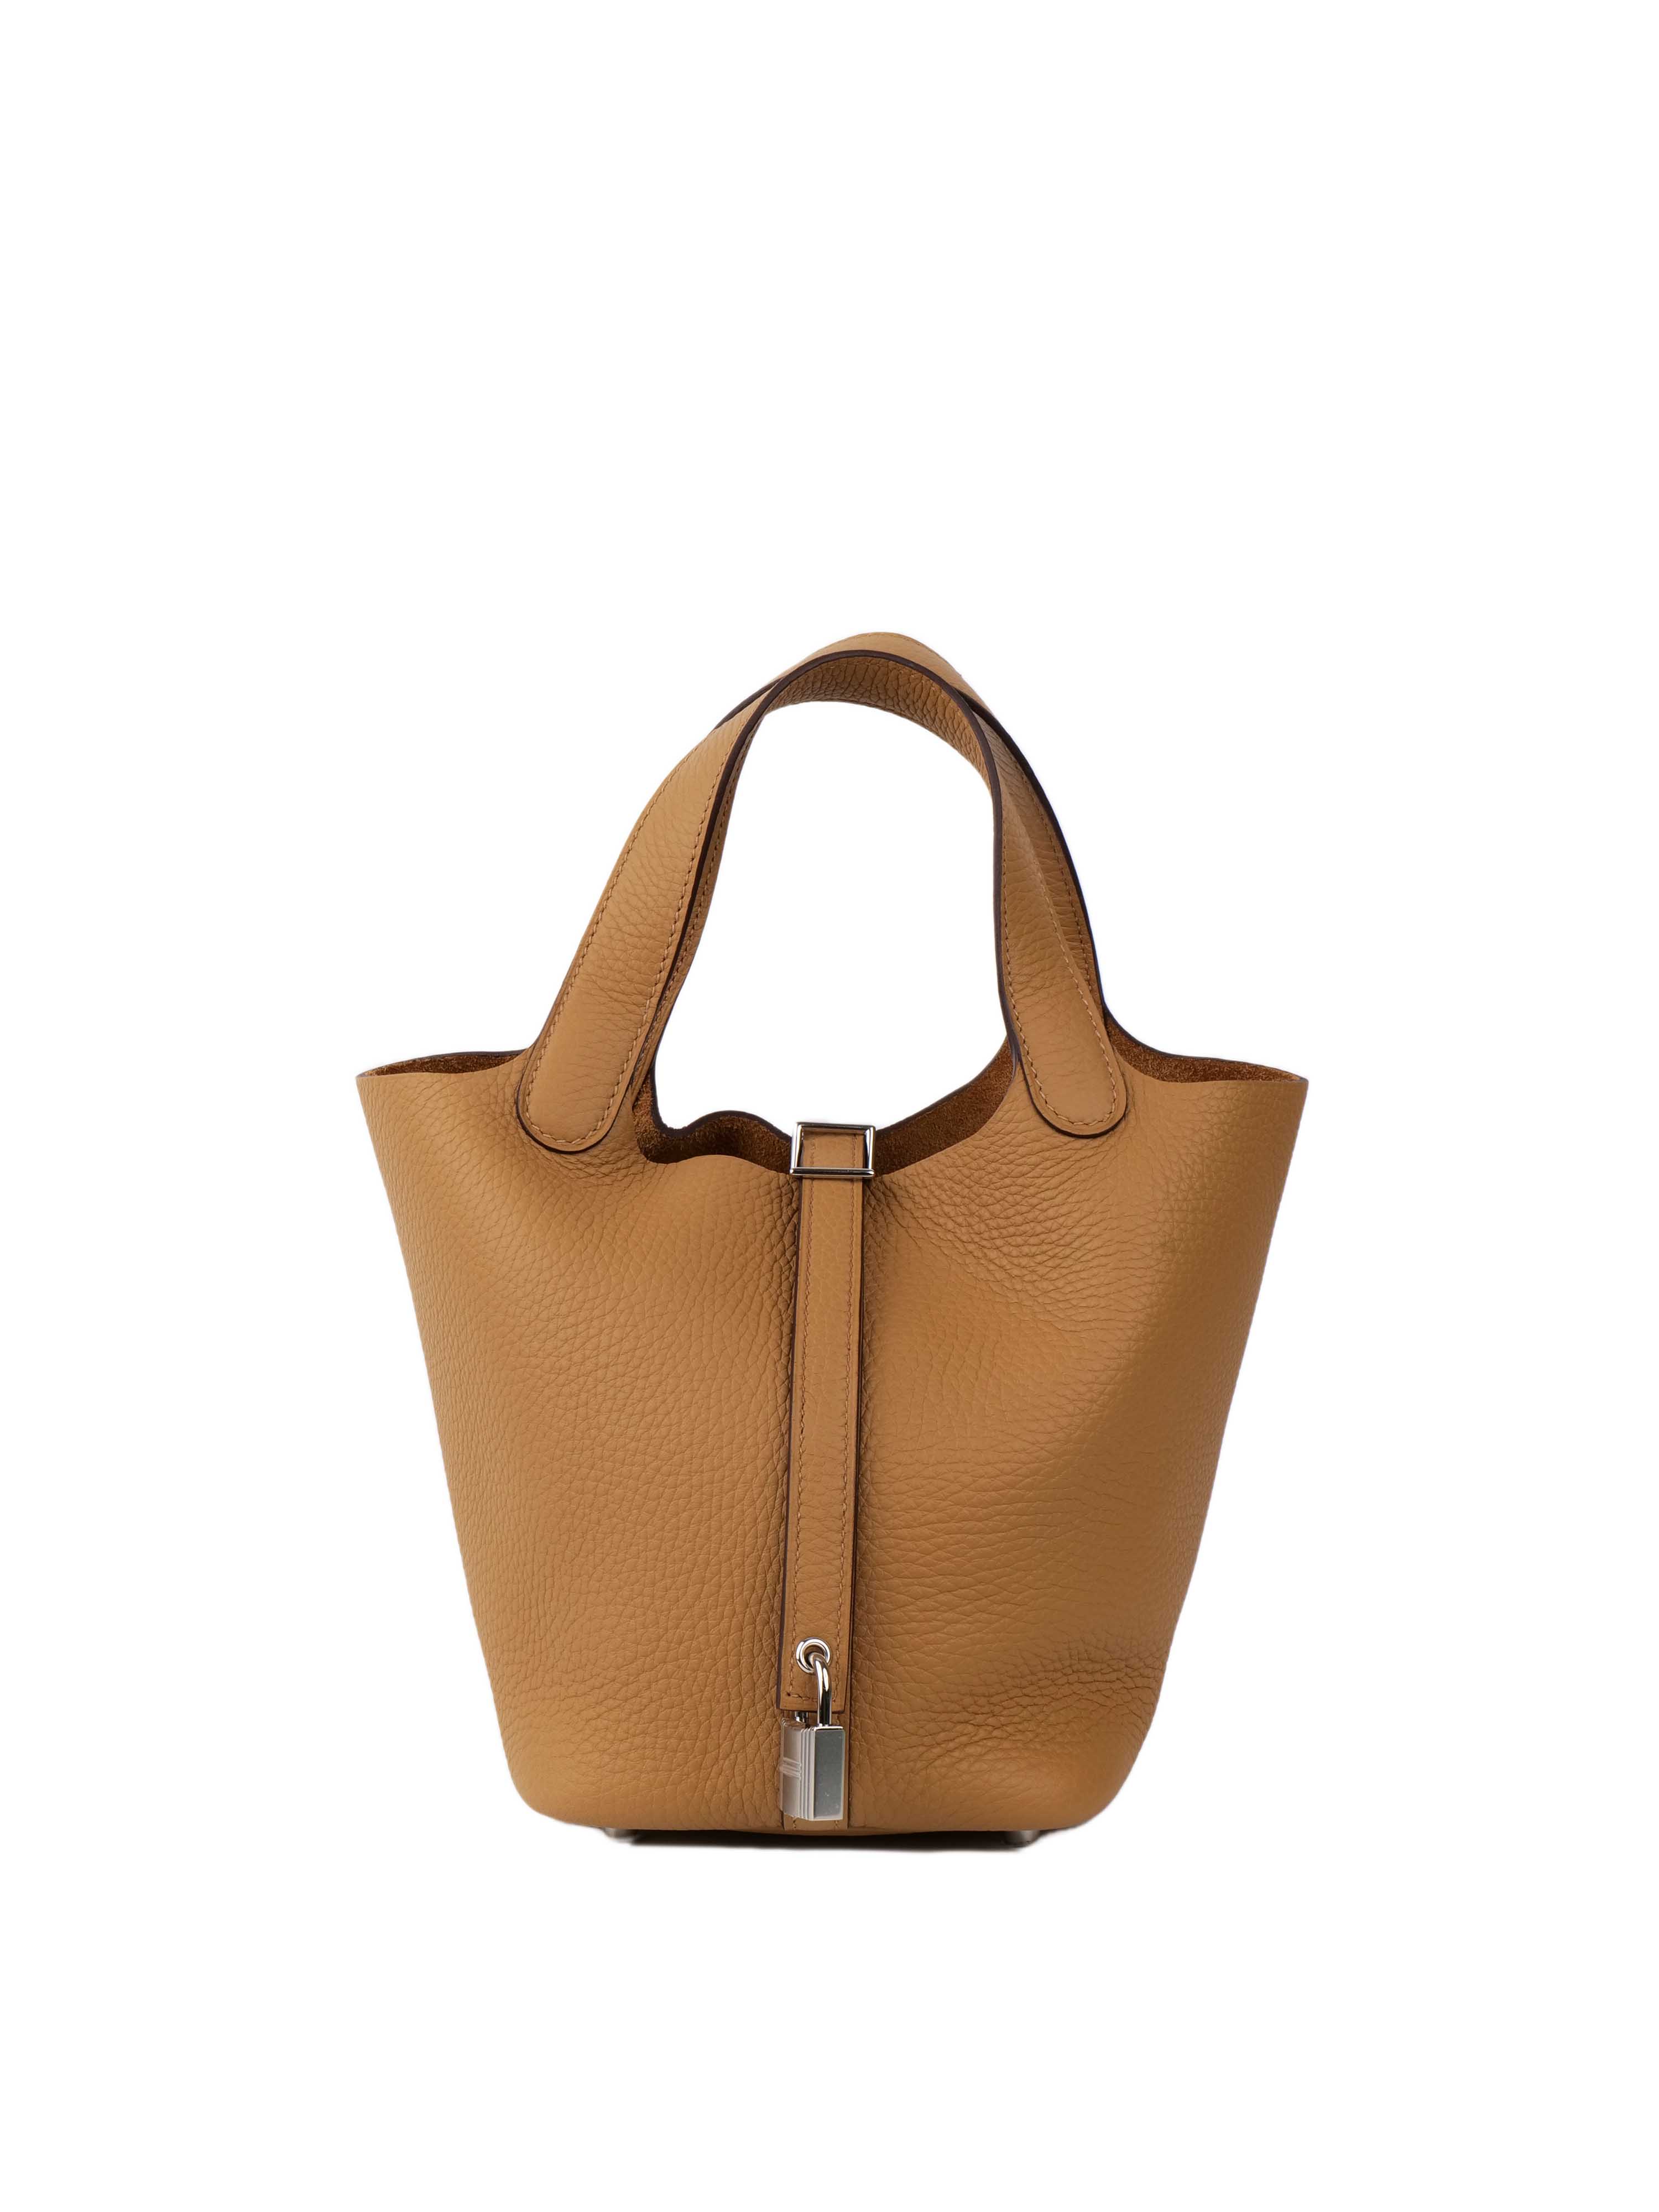 Hermes Picotin 18 in Biscuit SHW.